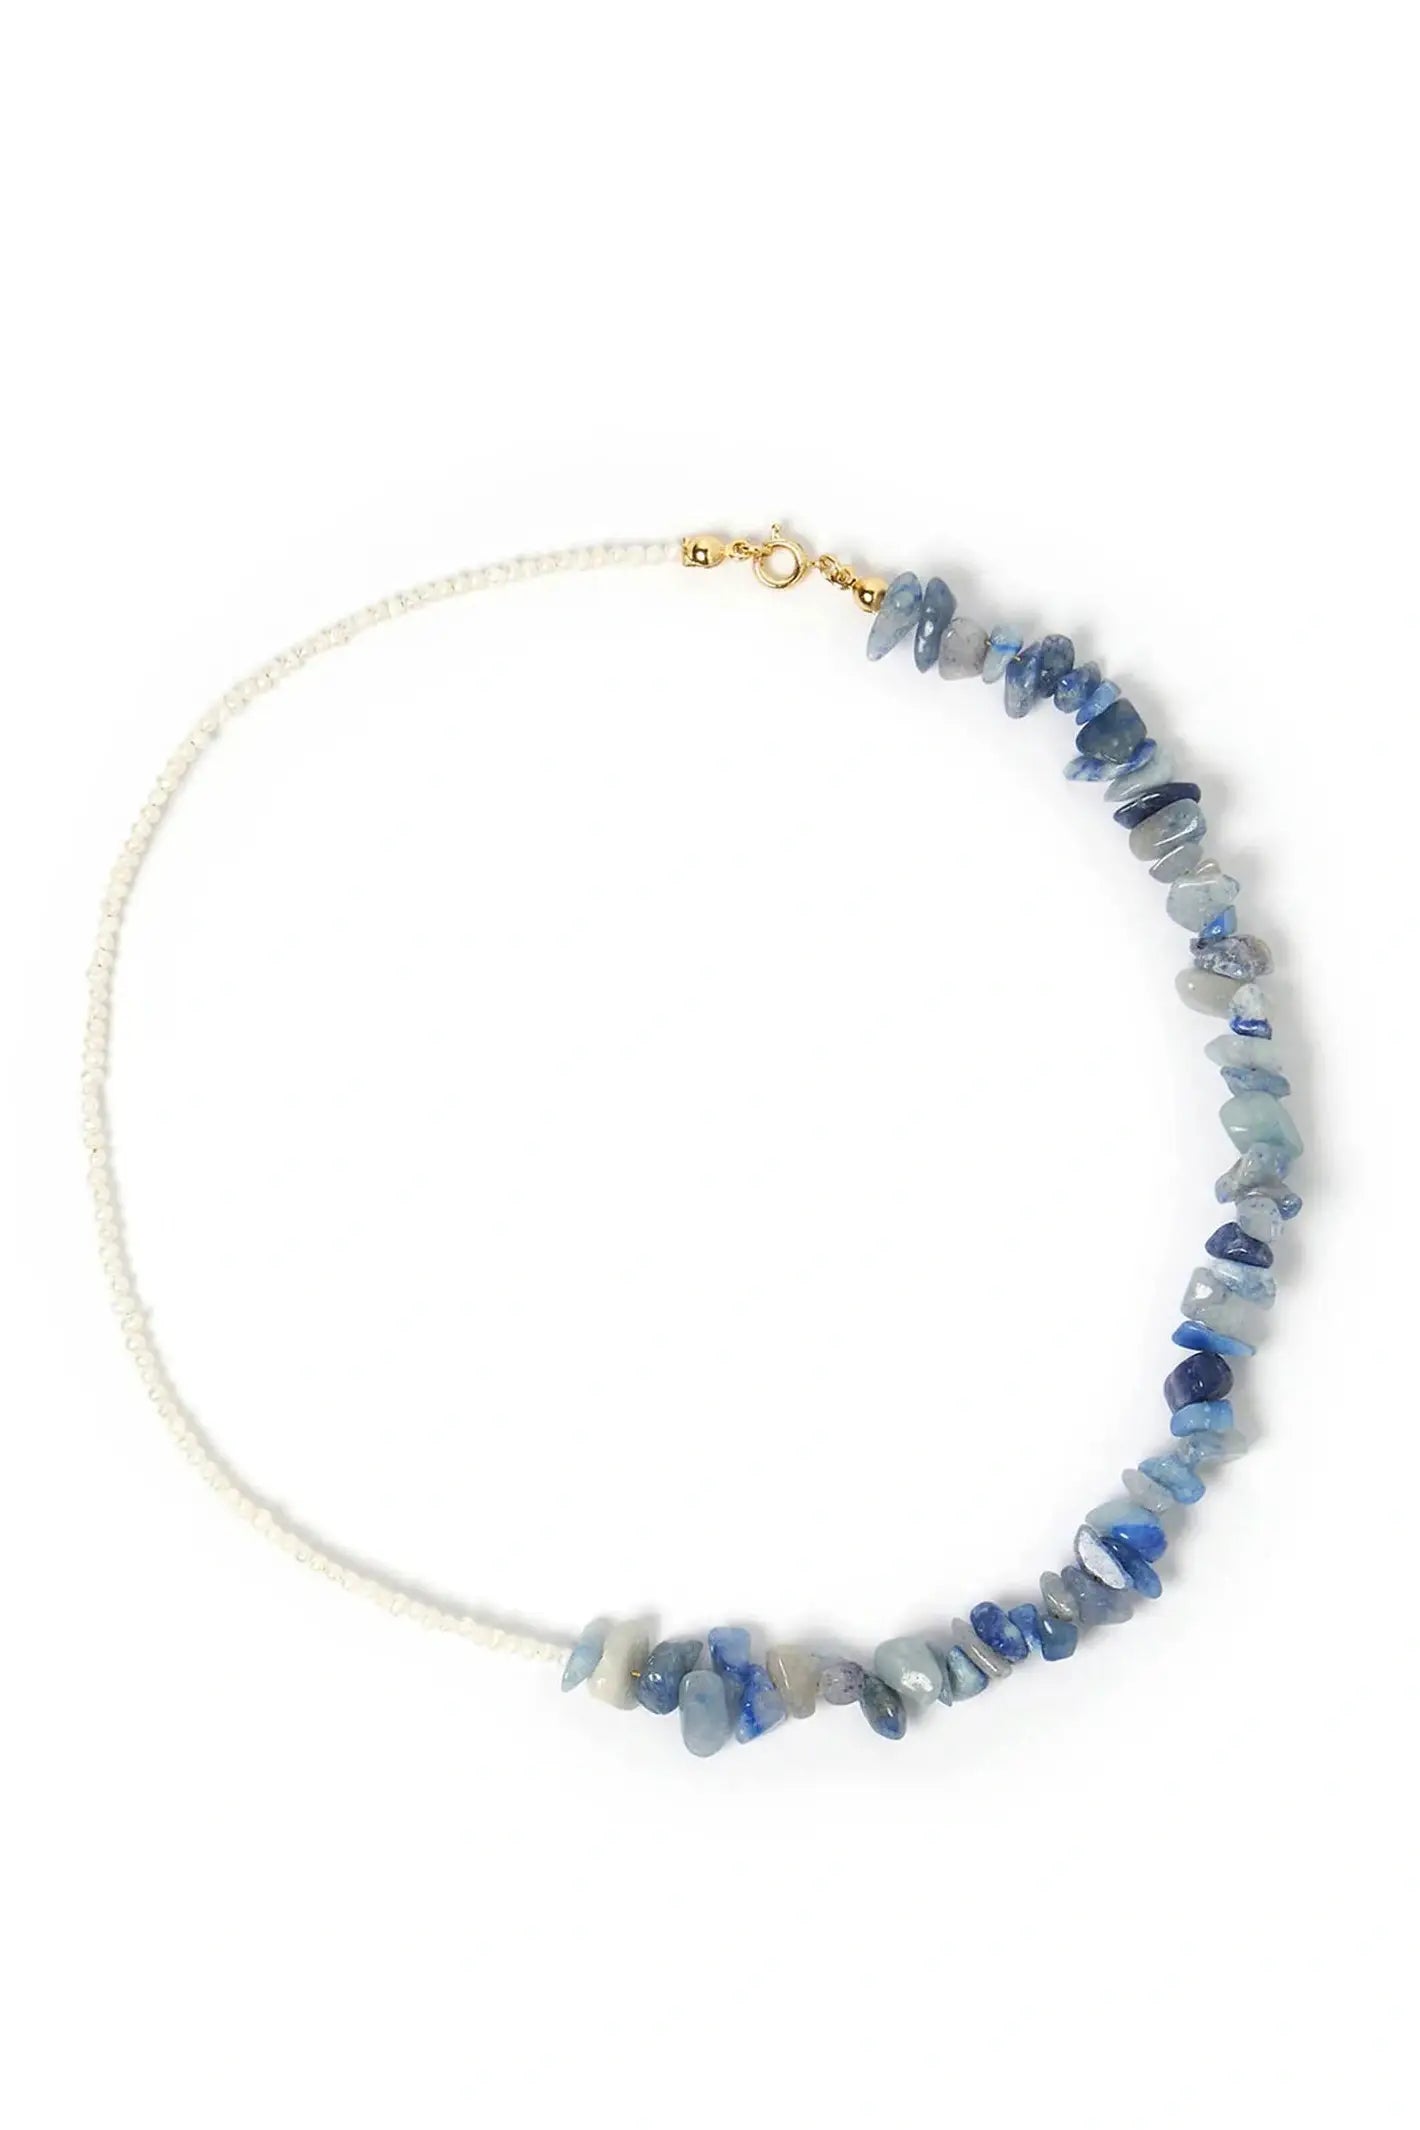 Arms of eve aaliyah gemstone necklace - blue iolite